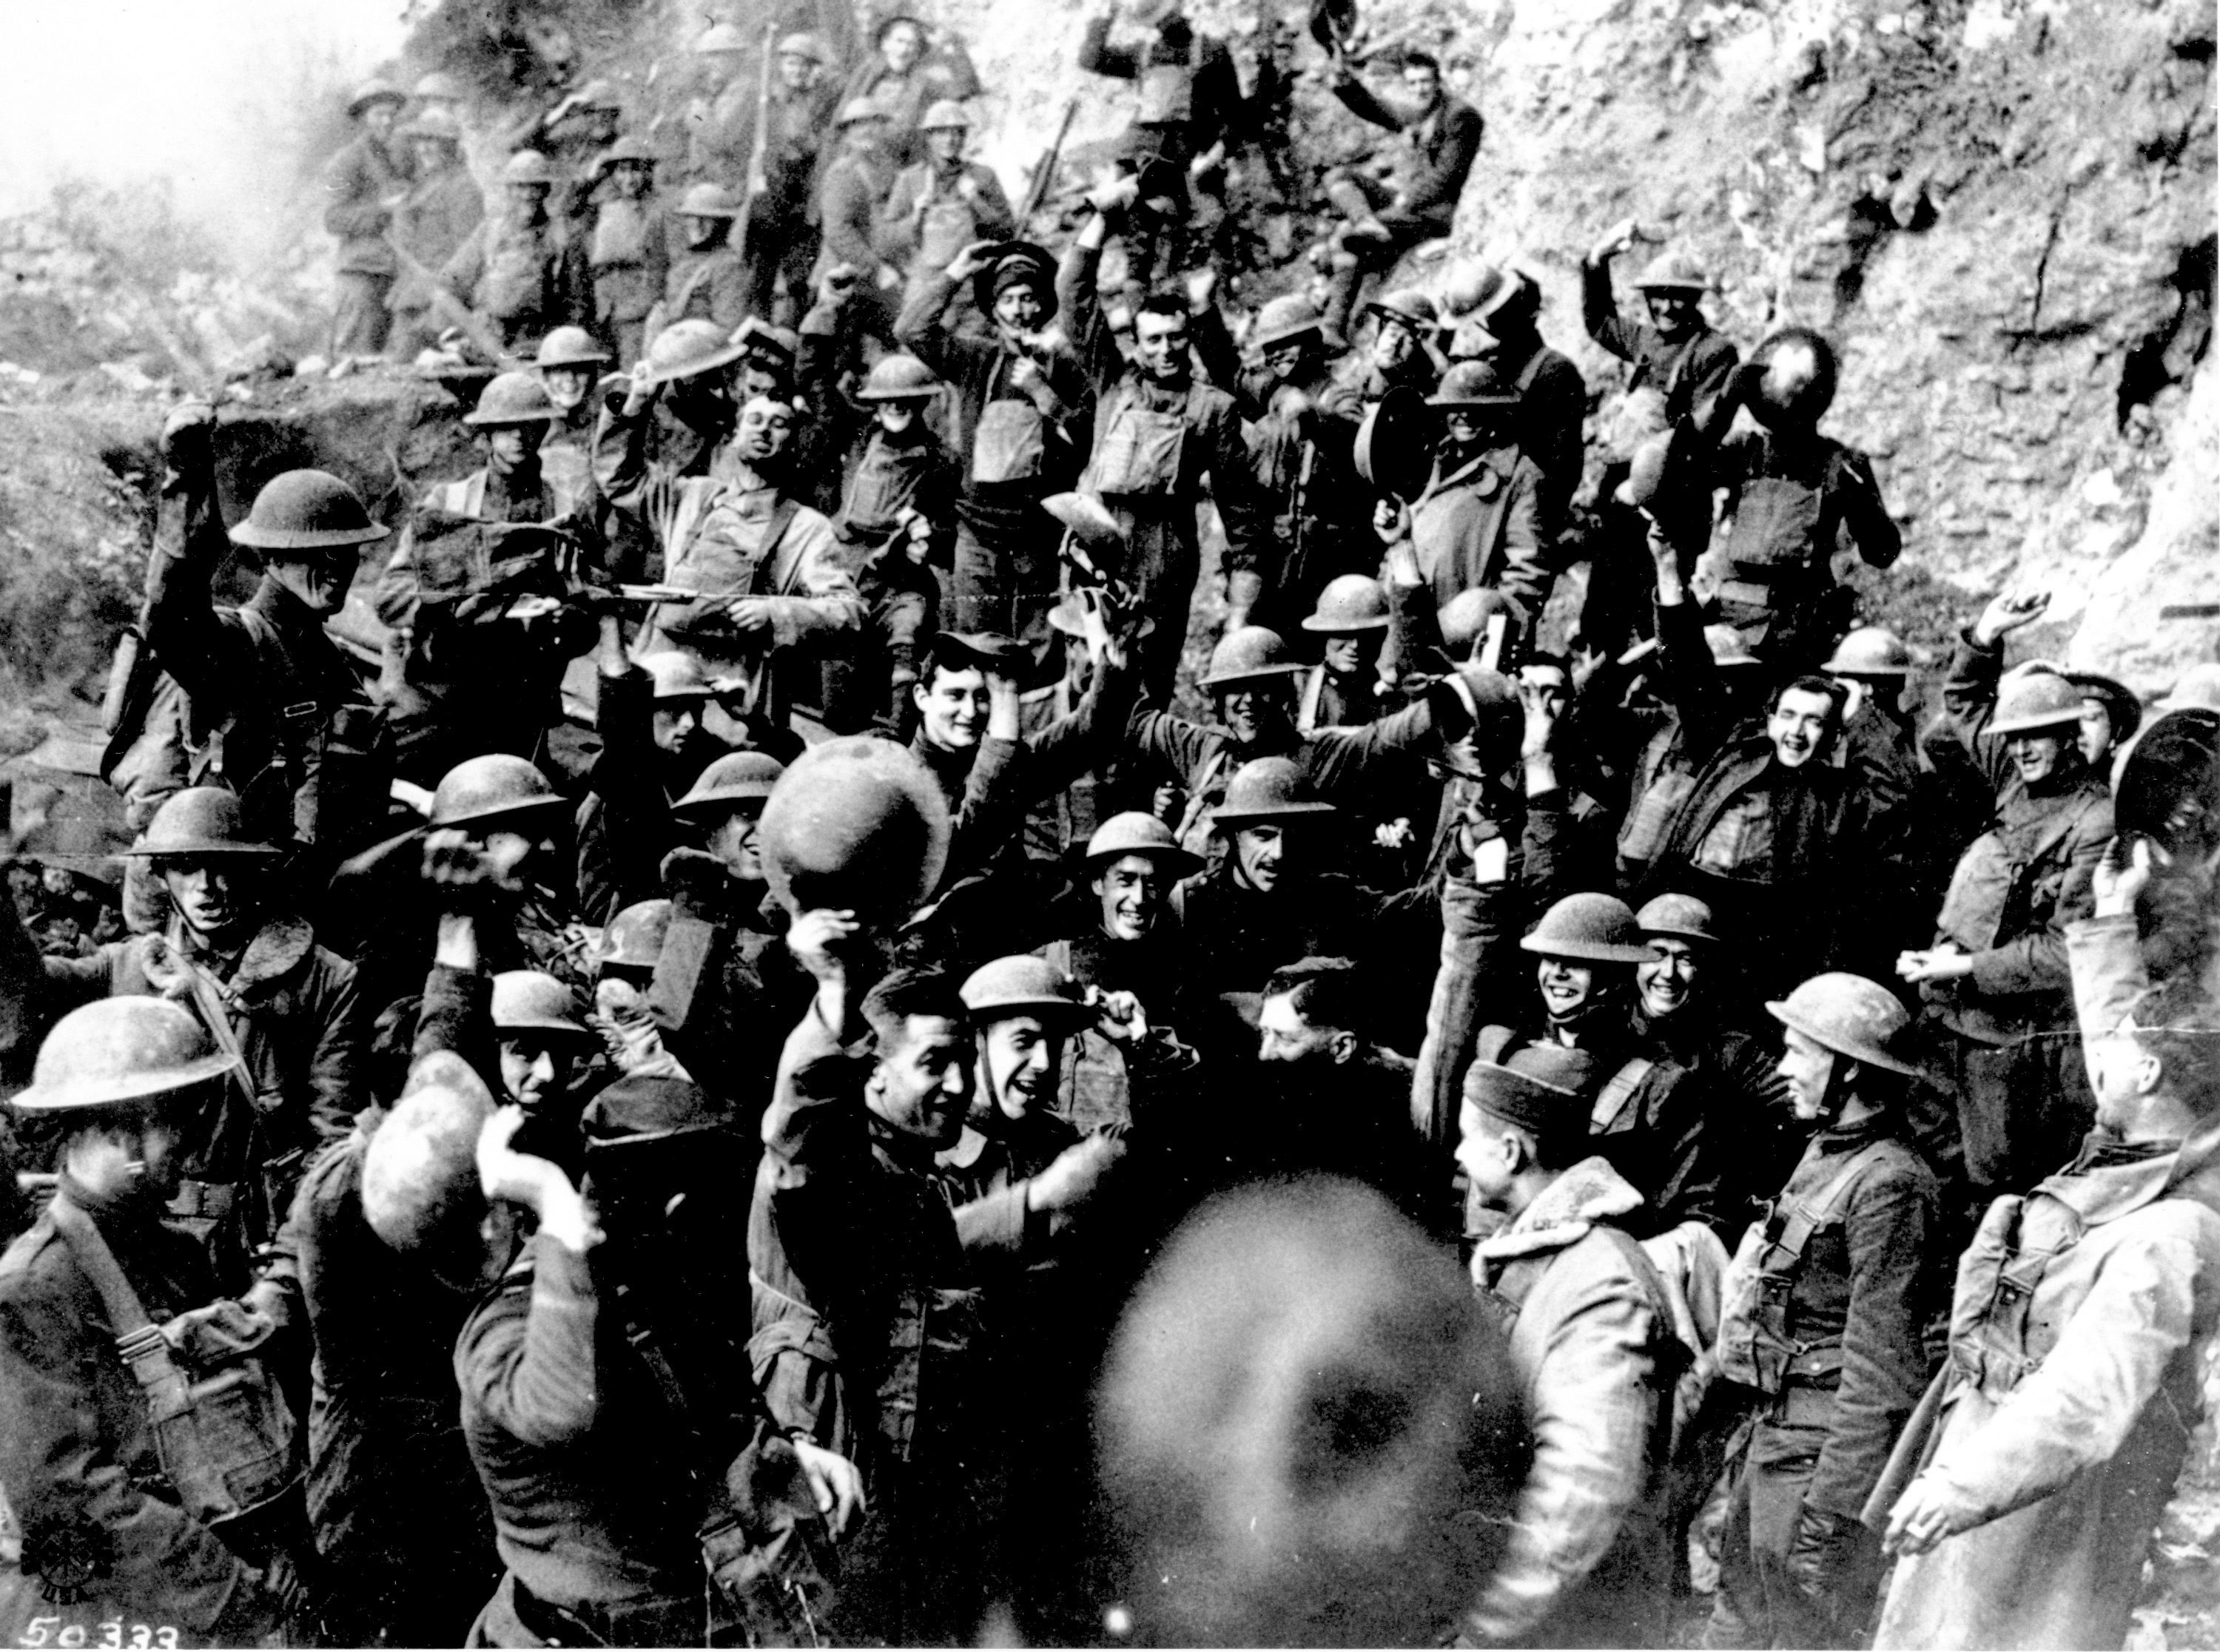 American troops cheer after hearing the news that the Armistice had been signed, ending World War I on November 11, 1918.